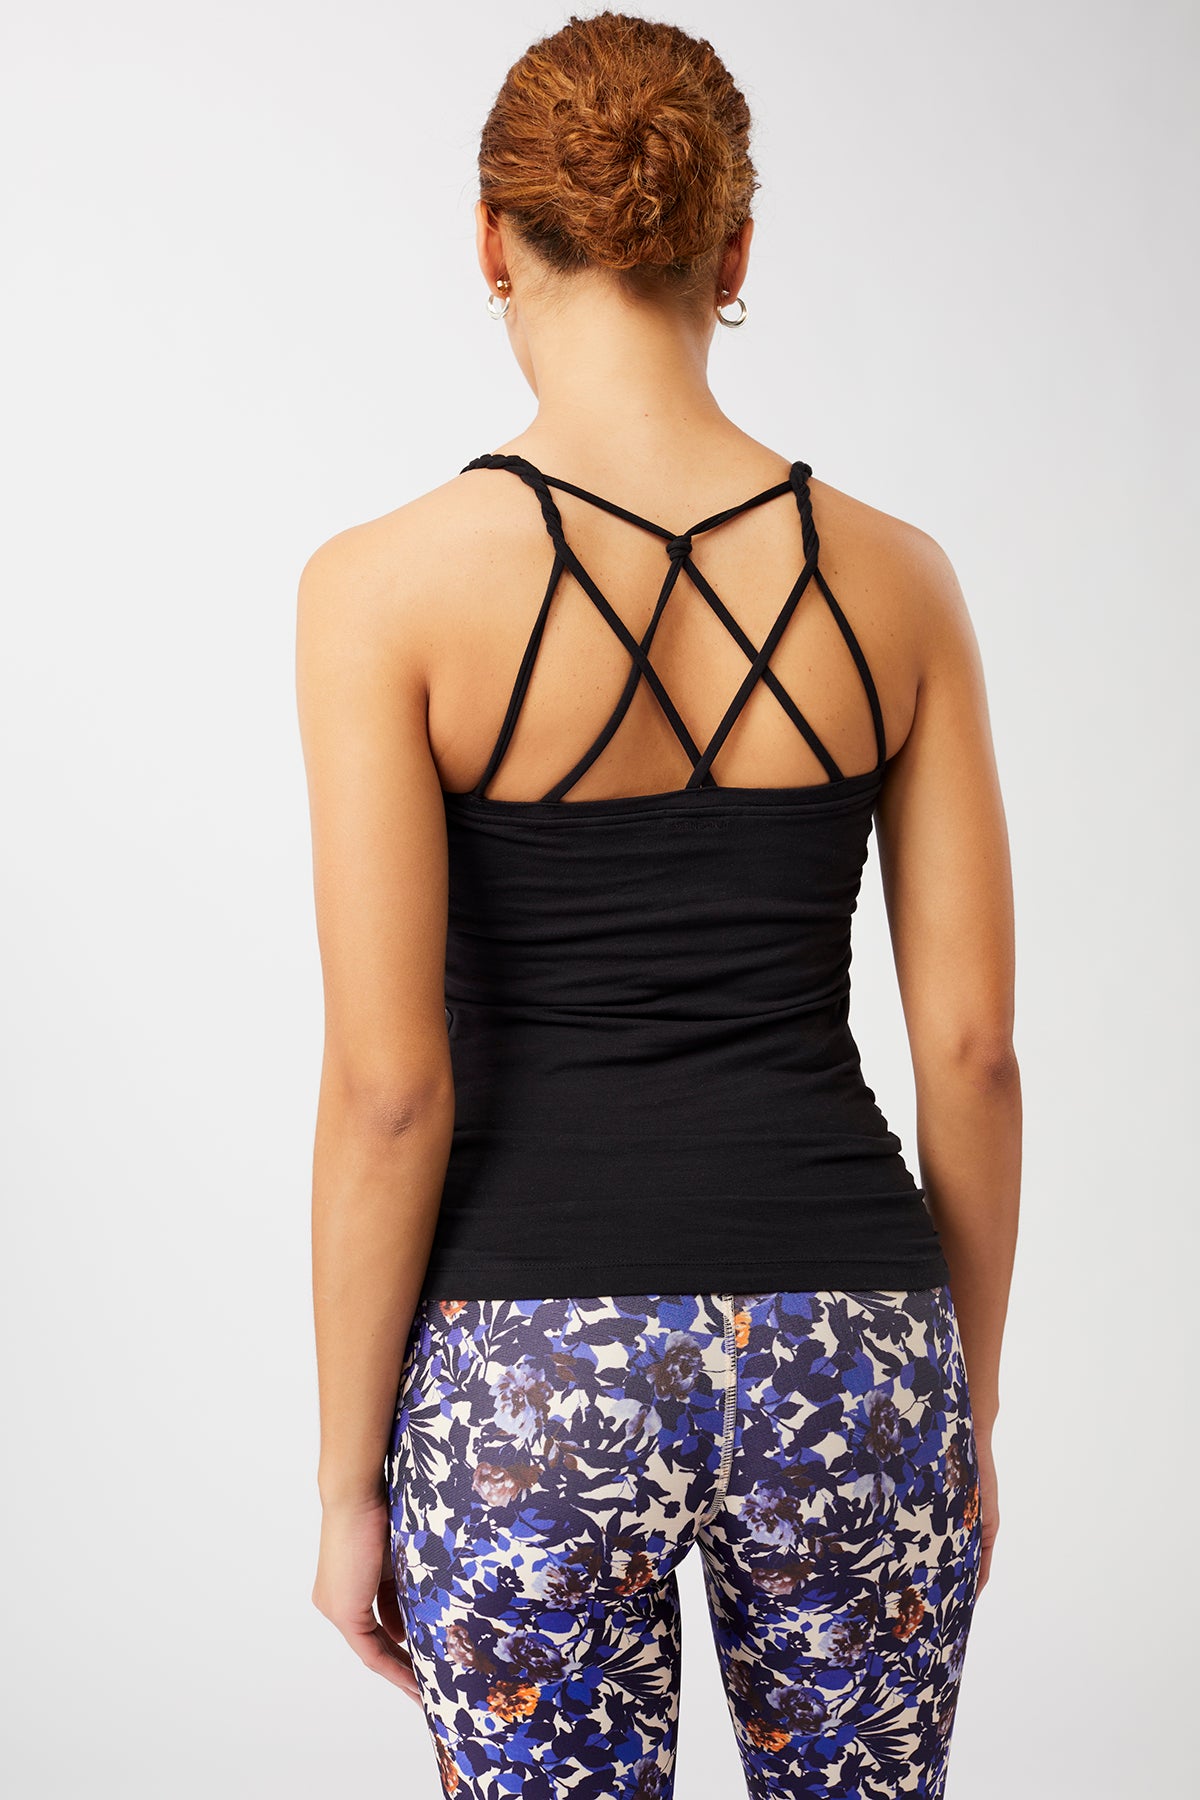 Mandala New Cable Top for women in the color Pistacchio